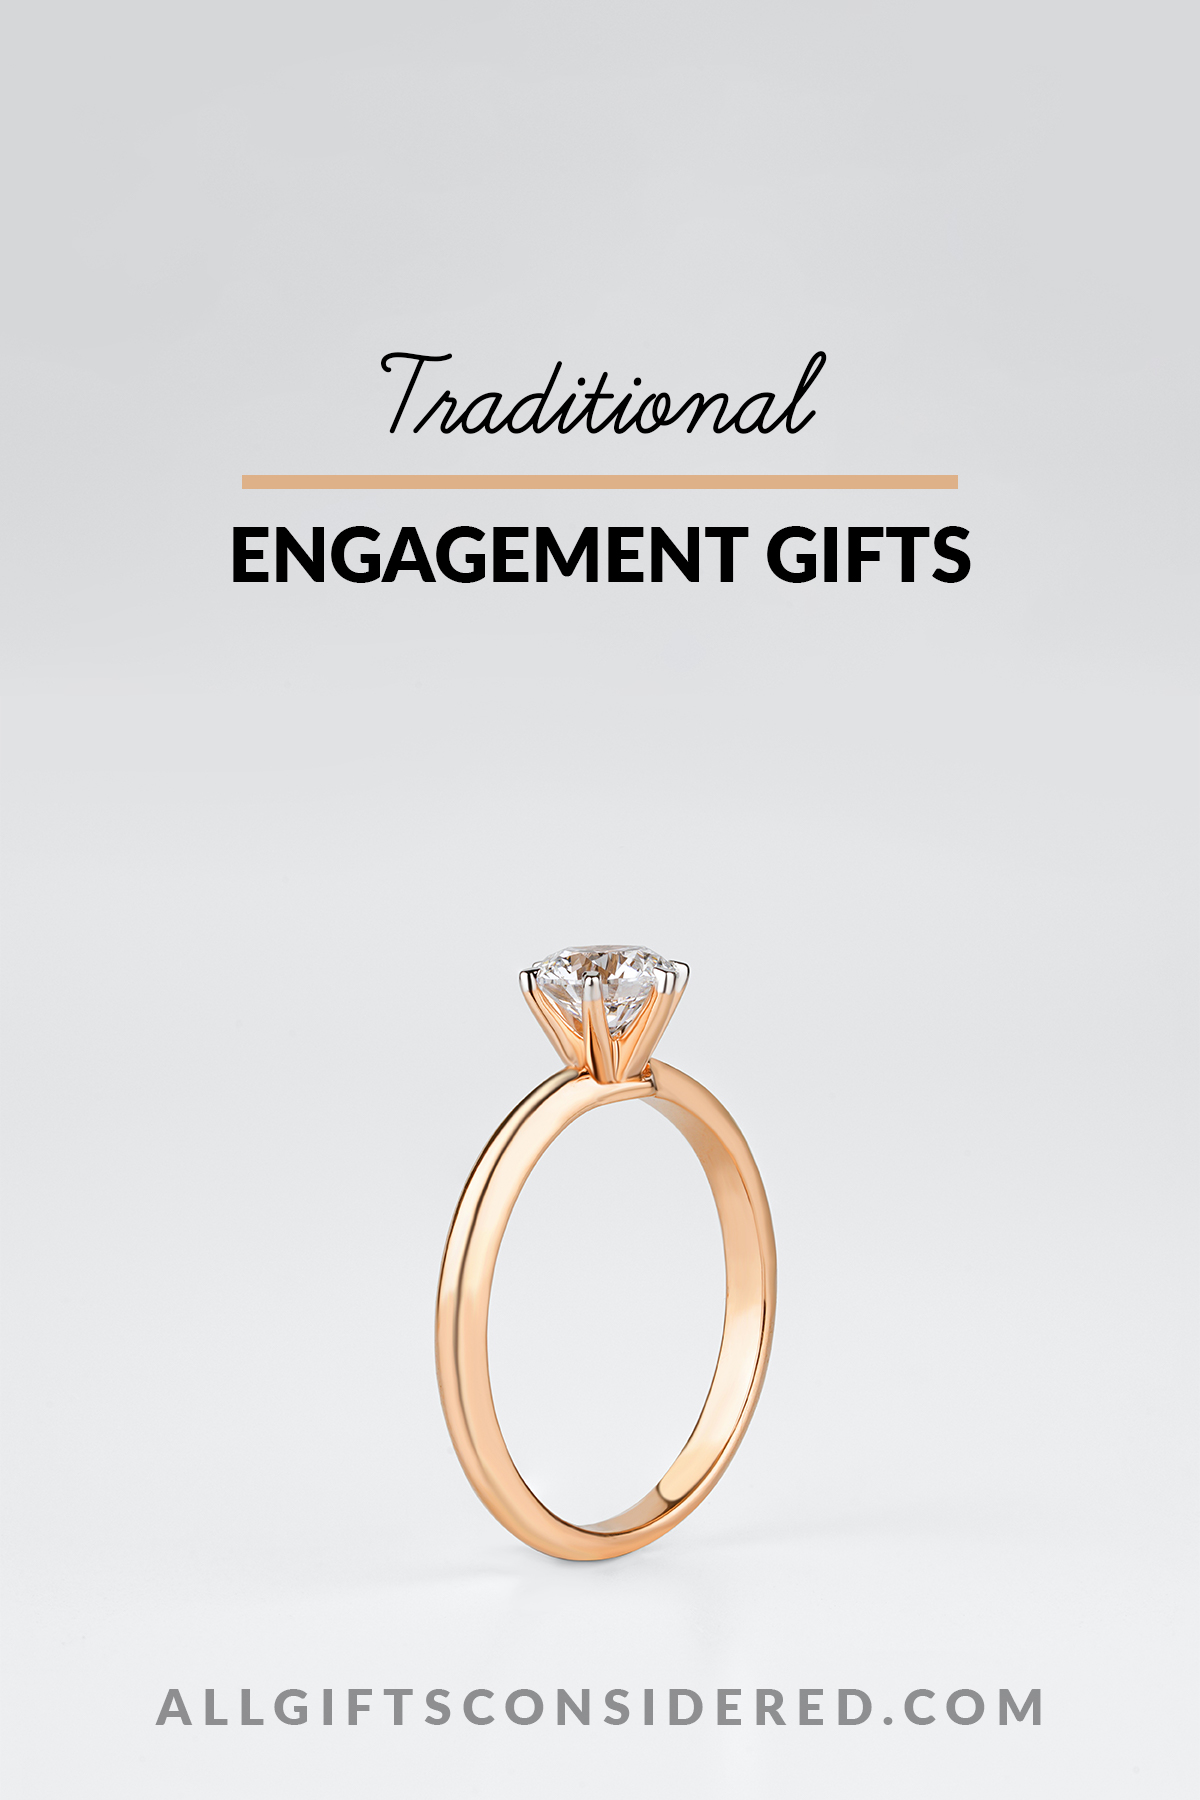 traditional engagement gifts - feature image